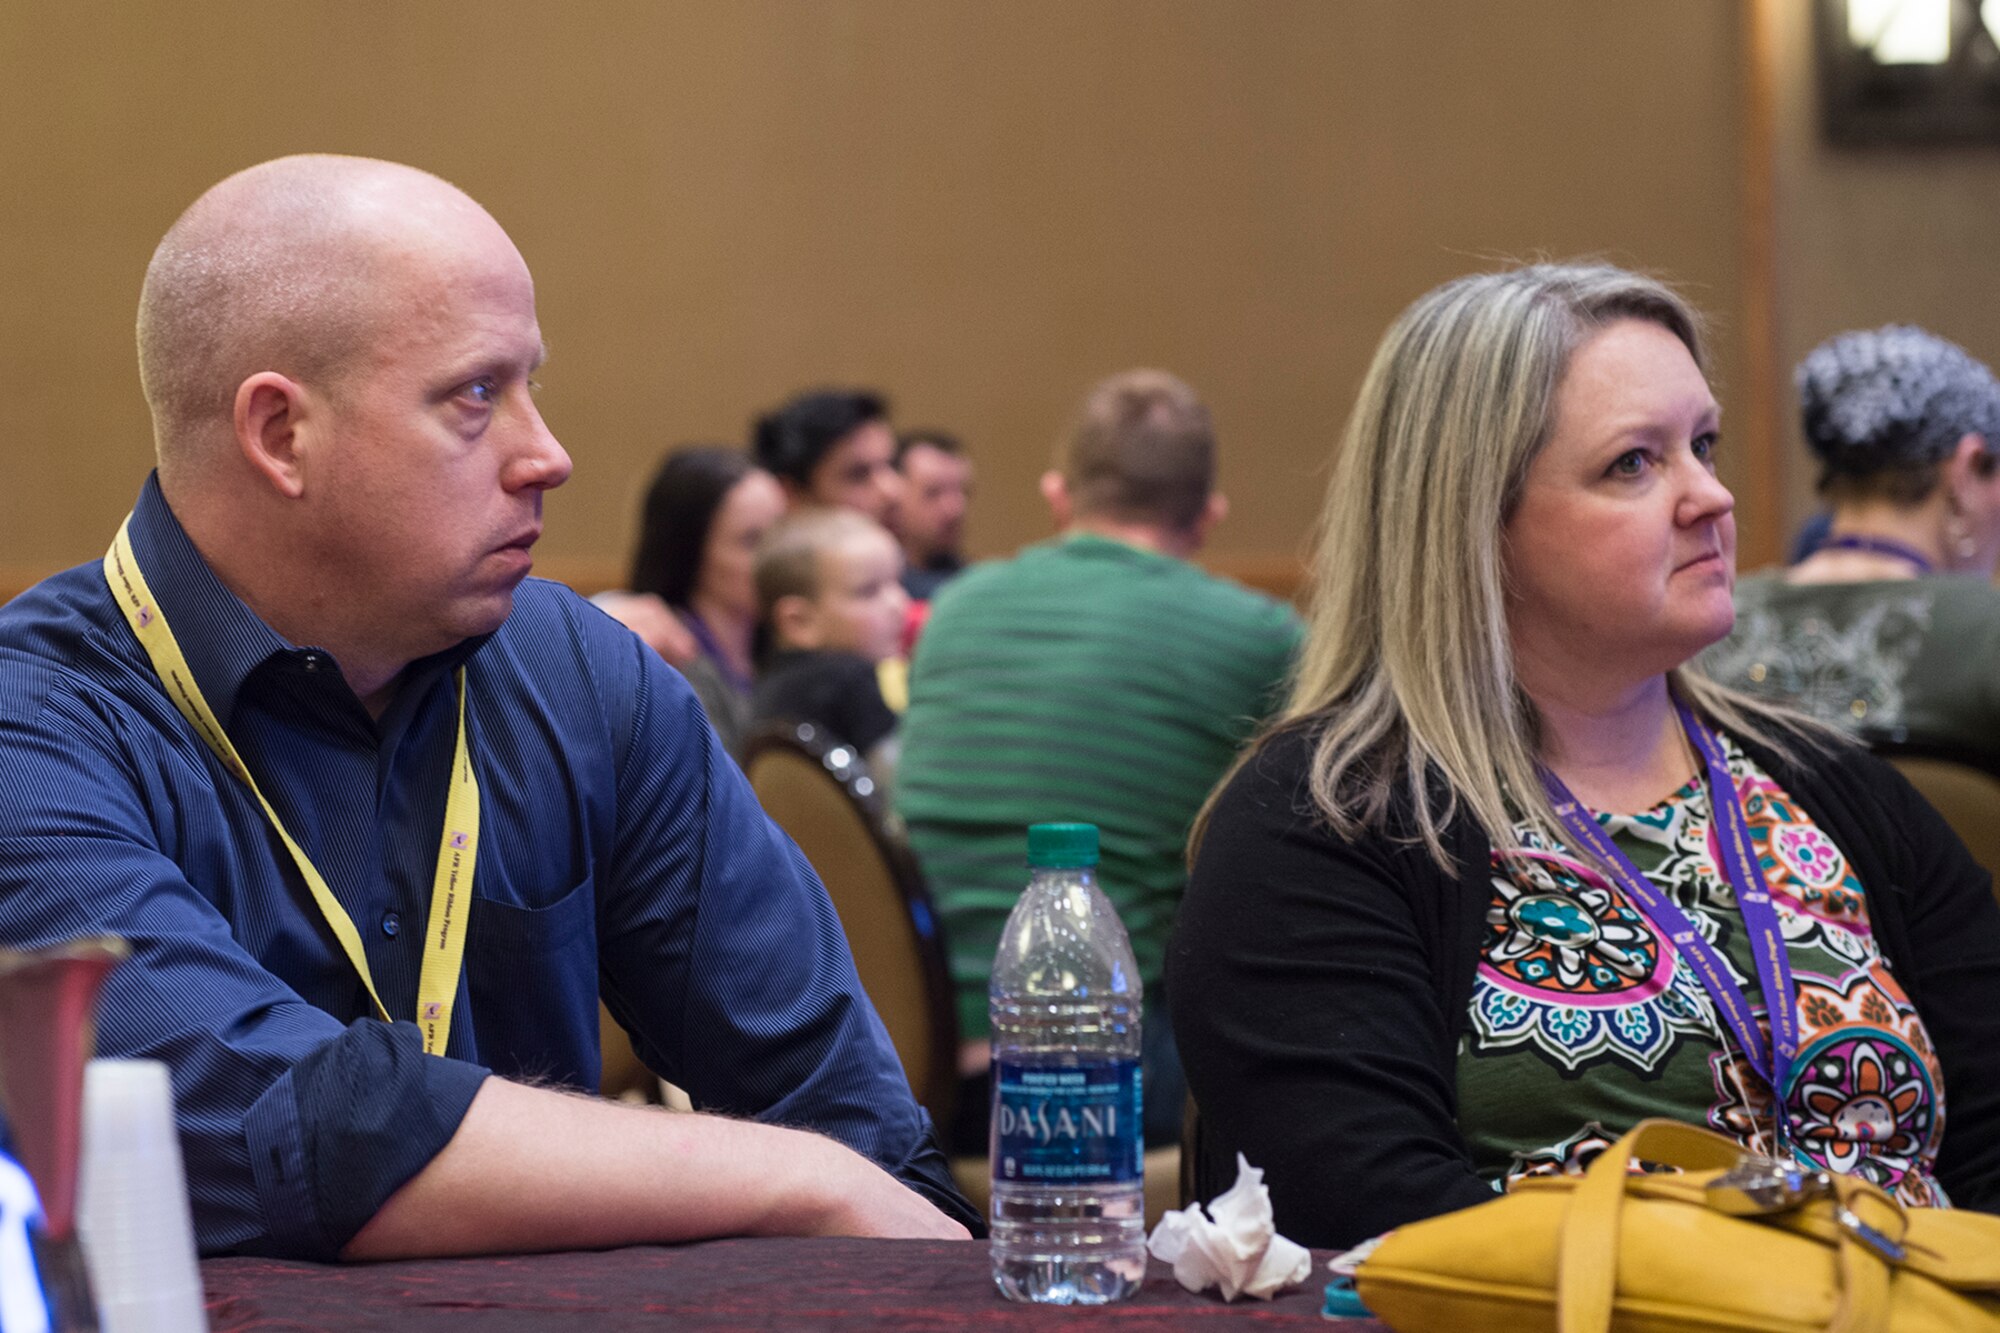 Senior Master Sgt. Mike Bier, 934th Security Forces Squadron superintendent, stationed at Minneapolis-St. Paul Air Reserve Station, Minnesota, and his guest Stephanie Woodward, participate in a breakout session at a Yellow Ribbon Reintegration Program event in Denver, Jan 22, 2016. The Yellow Ribbon Reintegration Program promotes the well-being of reservists and their families by connecting them with resources before and after deployments. (U.S. Air Force photo/Tech. Sgt. Benjamin Mota)